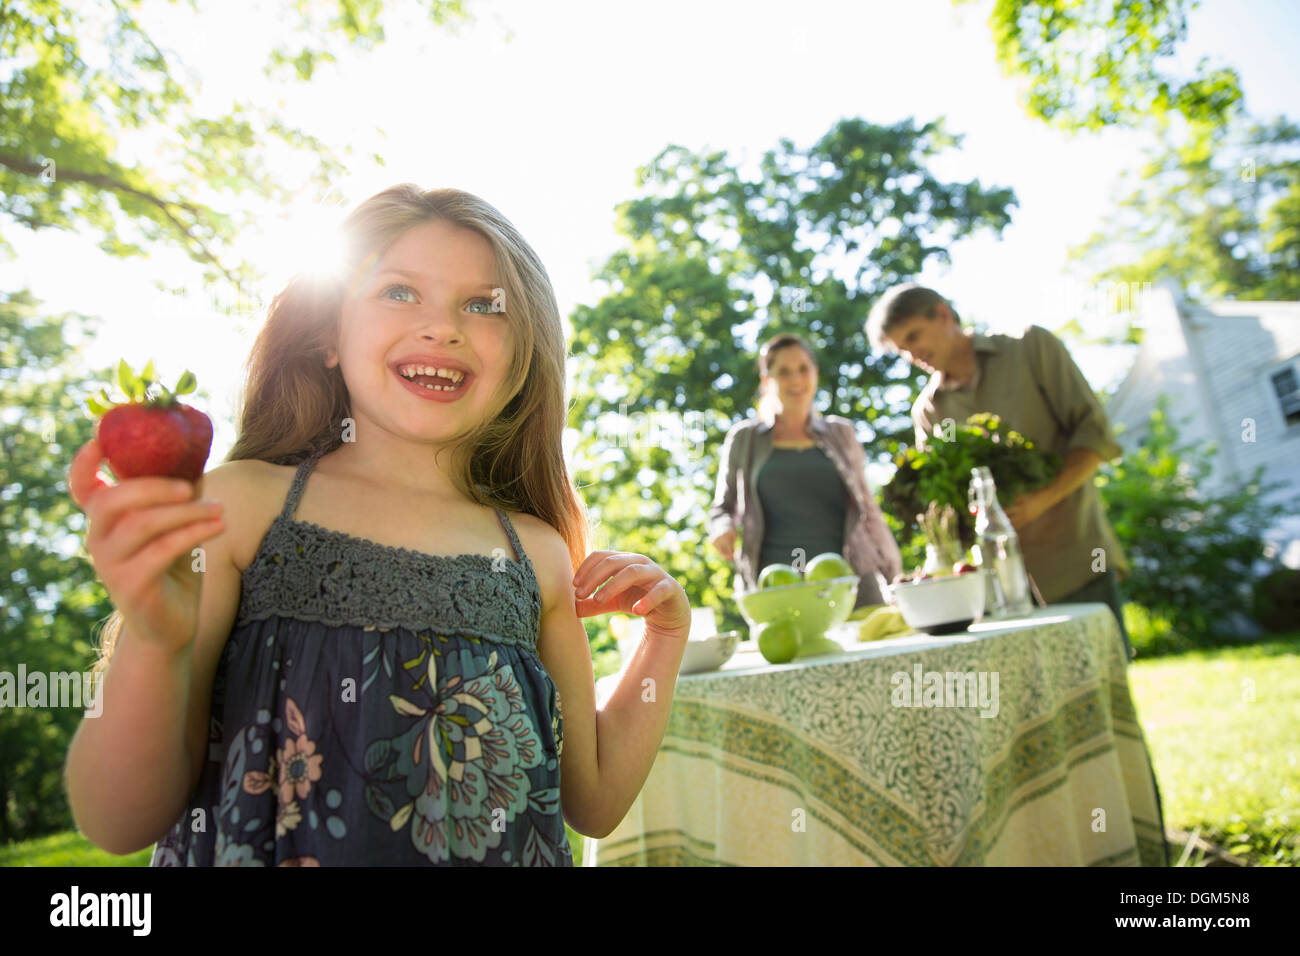 On farm Children adults together young girl holding large fresh organically produced strawberry fruit Two adults beside round Stock Photo